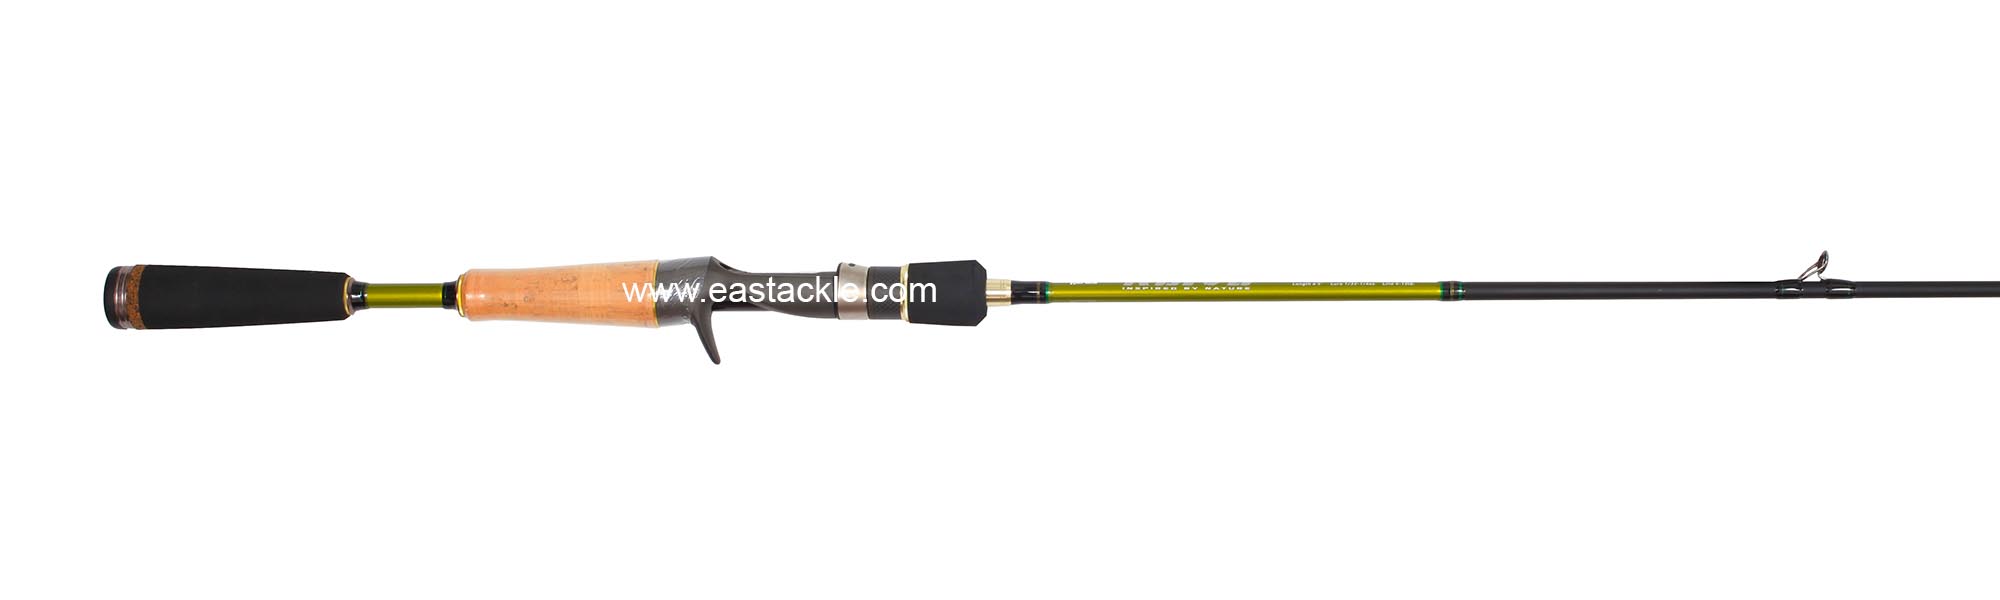 Rapala - Koivu - KVC652M - Bait Casting Rod - Butt to Stripper Guide (Side View) | Eastackle